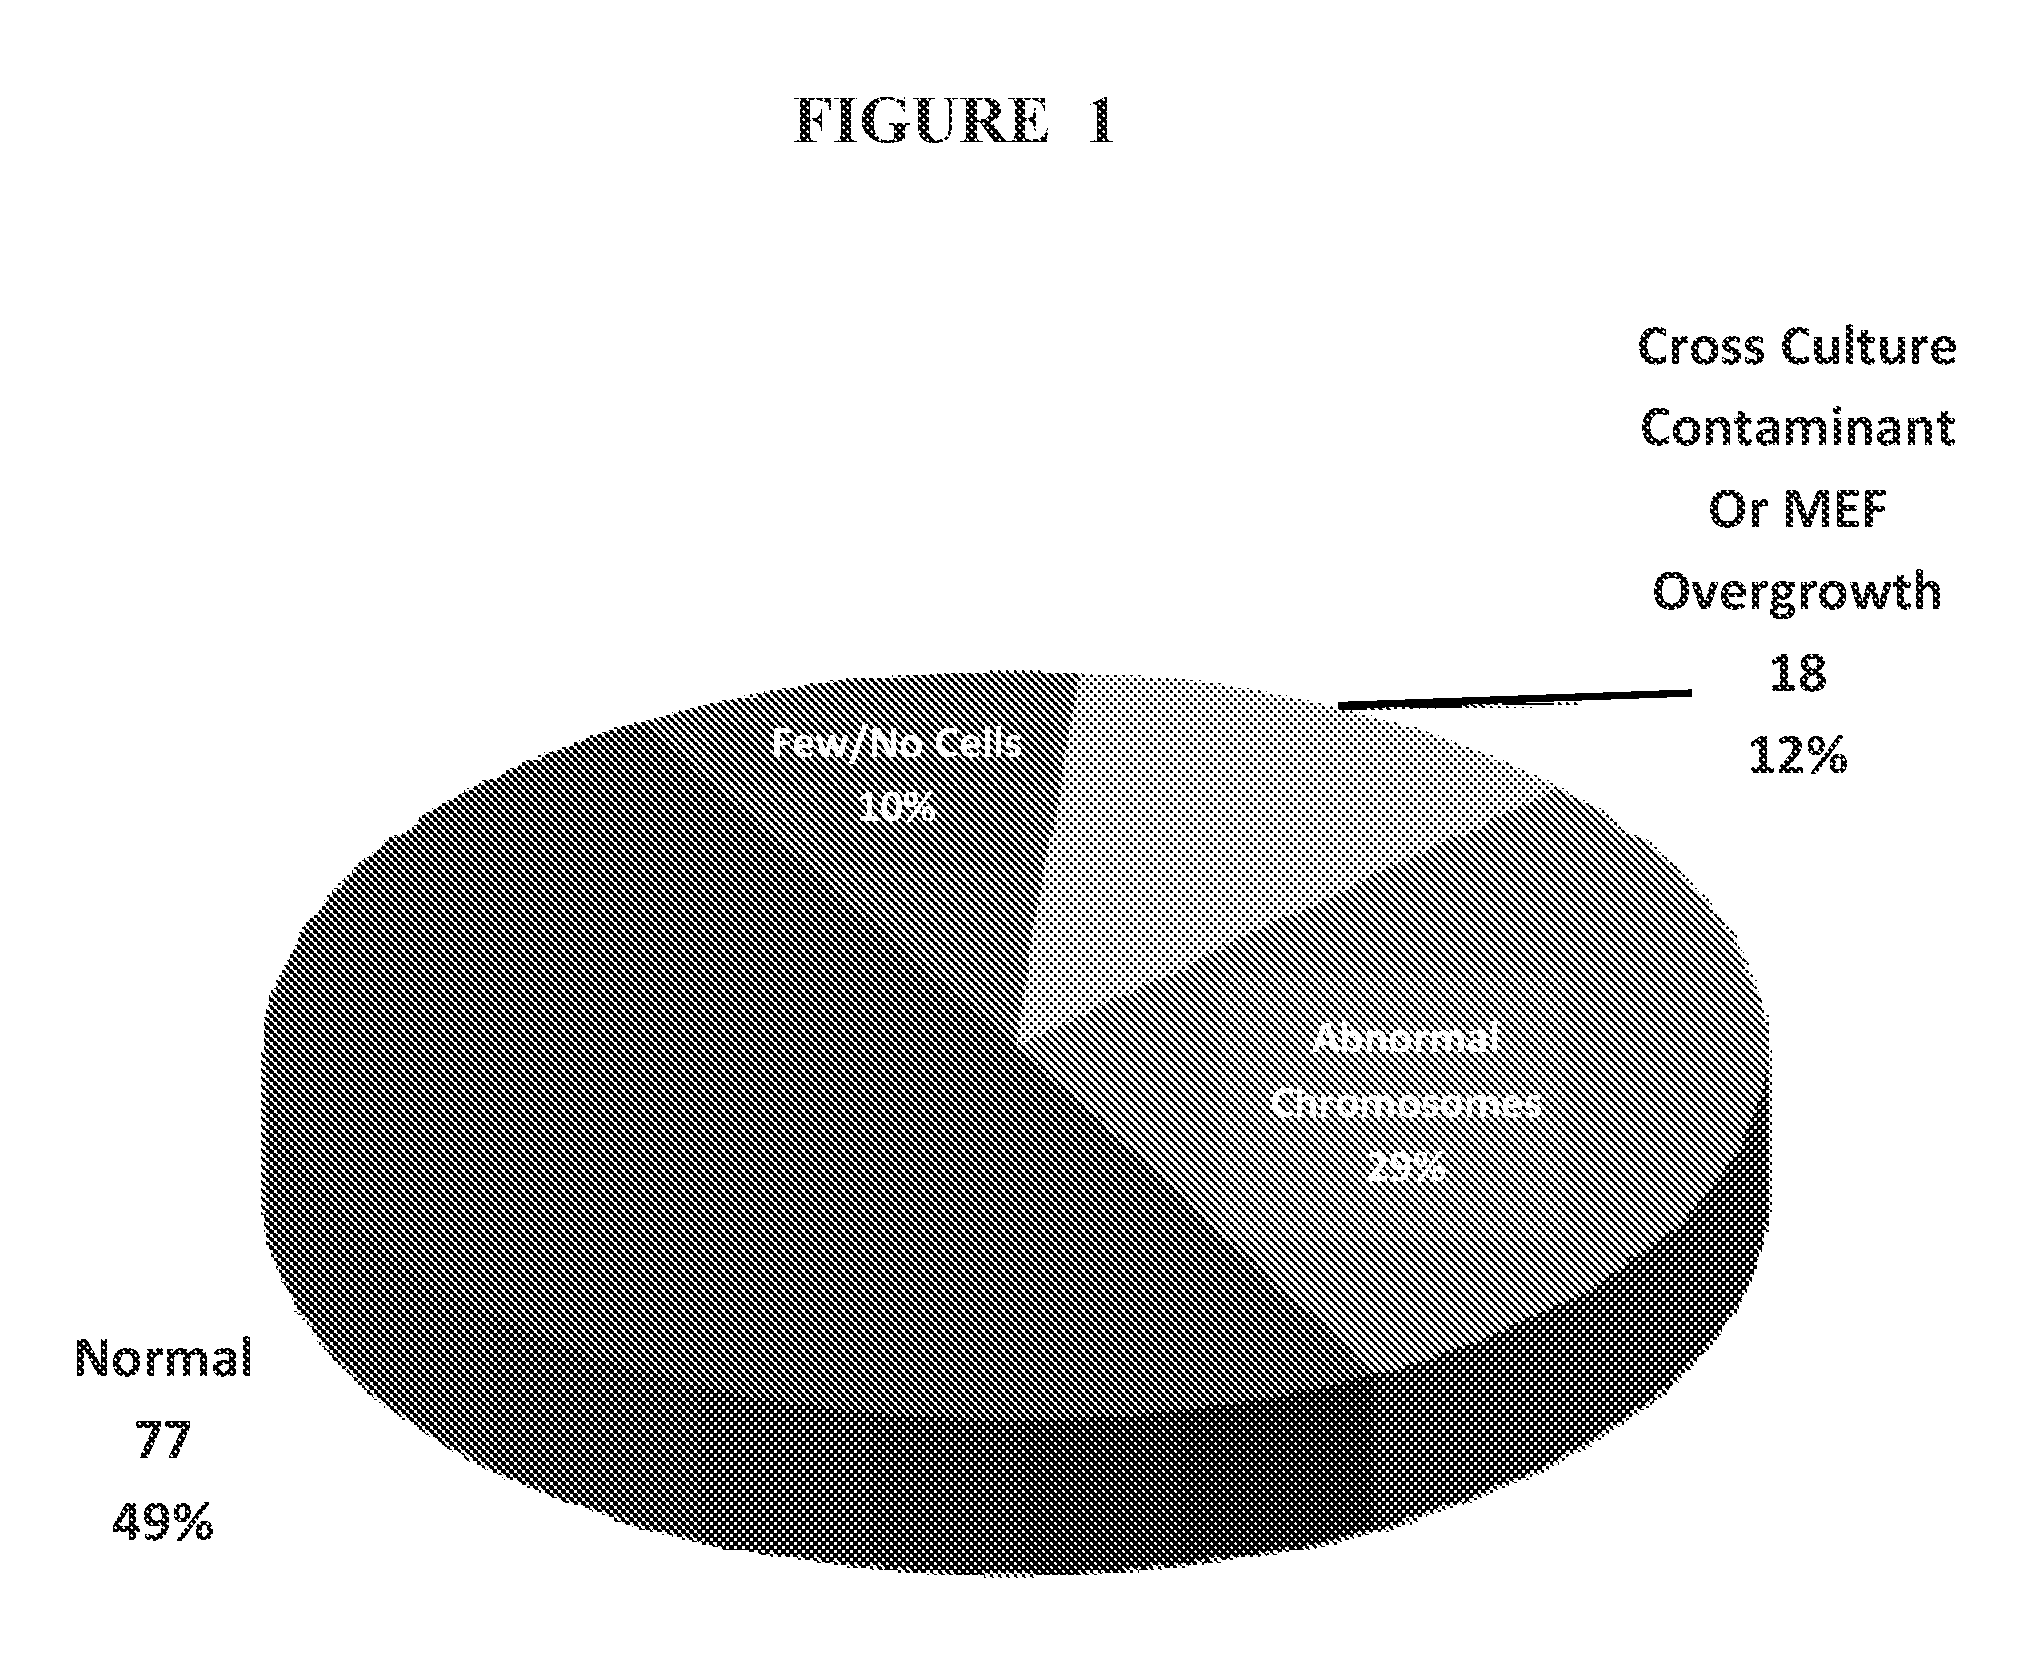 Methods and assays for screening stem cells